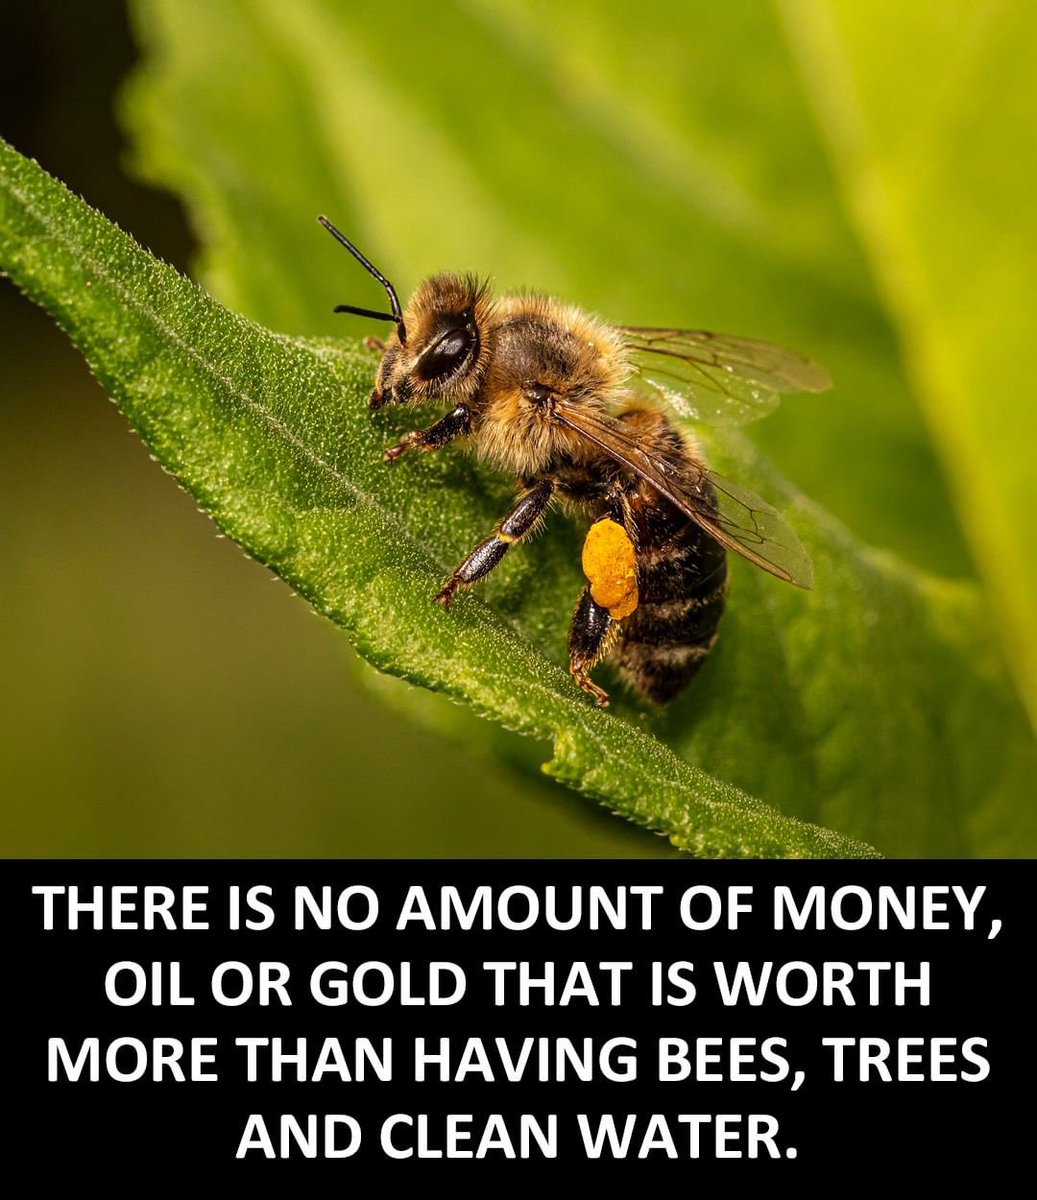 There is no amount of money, oil or gold that is worth more than having 🐝🐝🐝 🌳 🌳🌳 and clean 💧 Let’s protect the bees together: change.org/SaveTheBee @BeeAsMarine